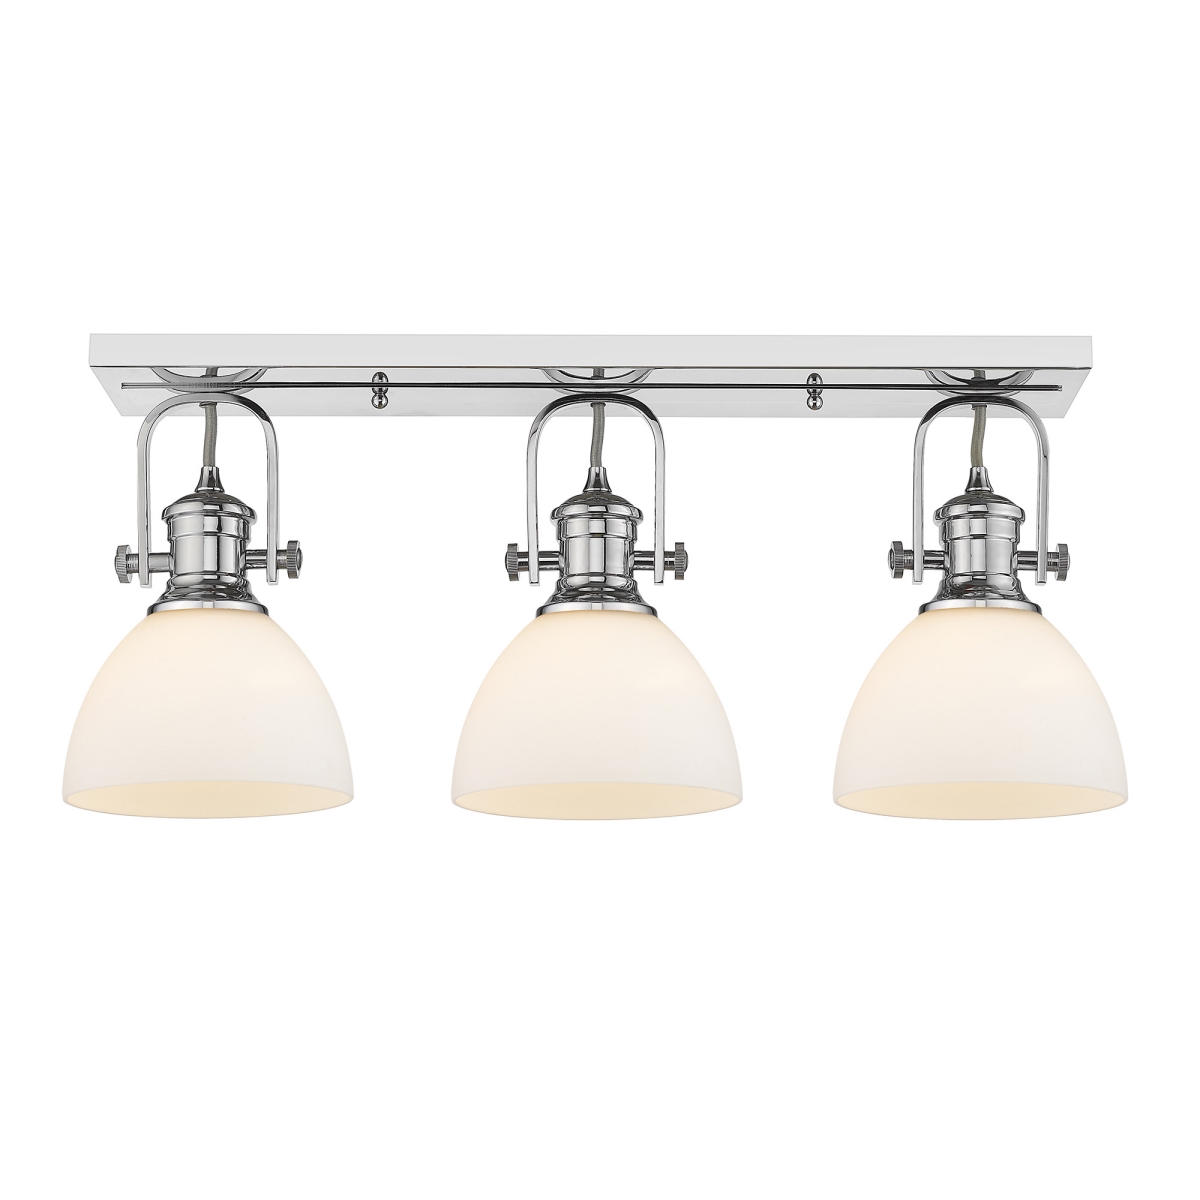 3118-3sf Ch-op Hines 3 Light In Chrome With Opal Glass